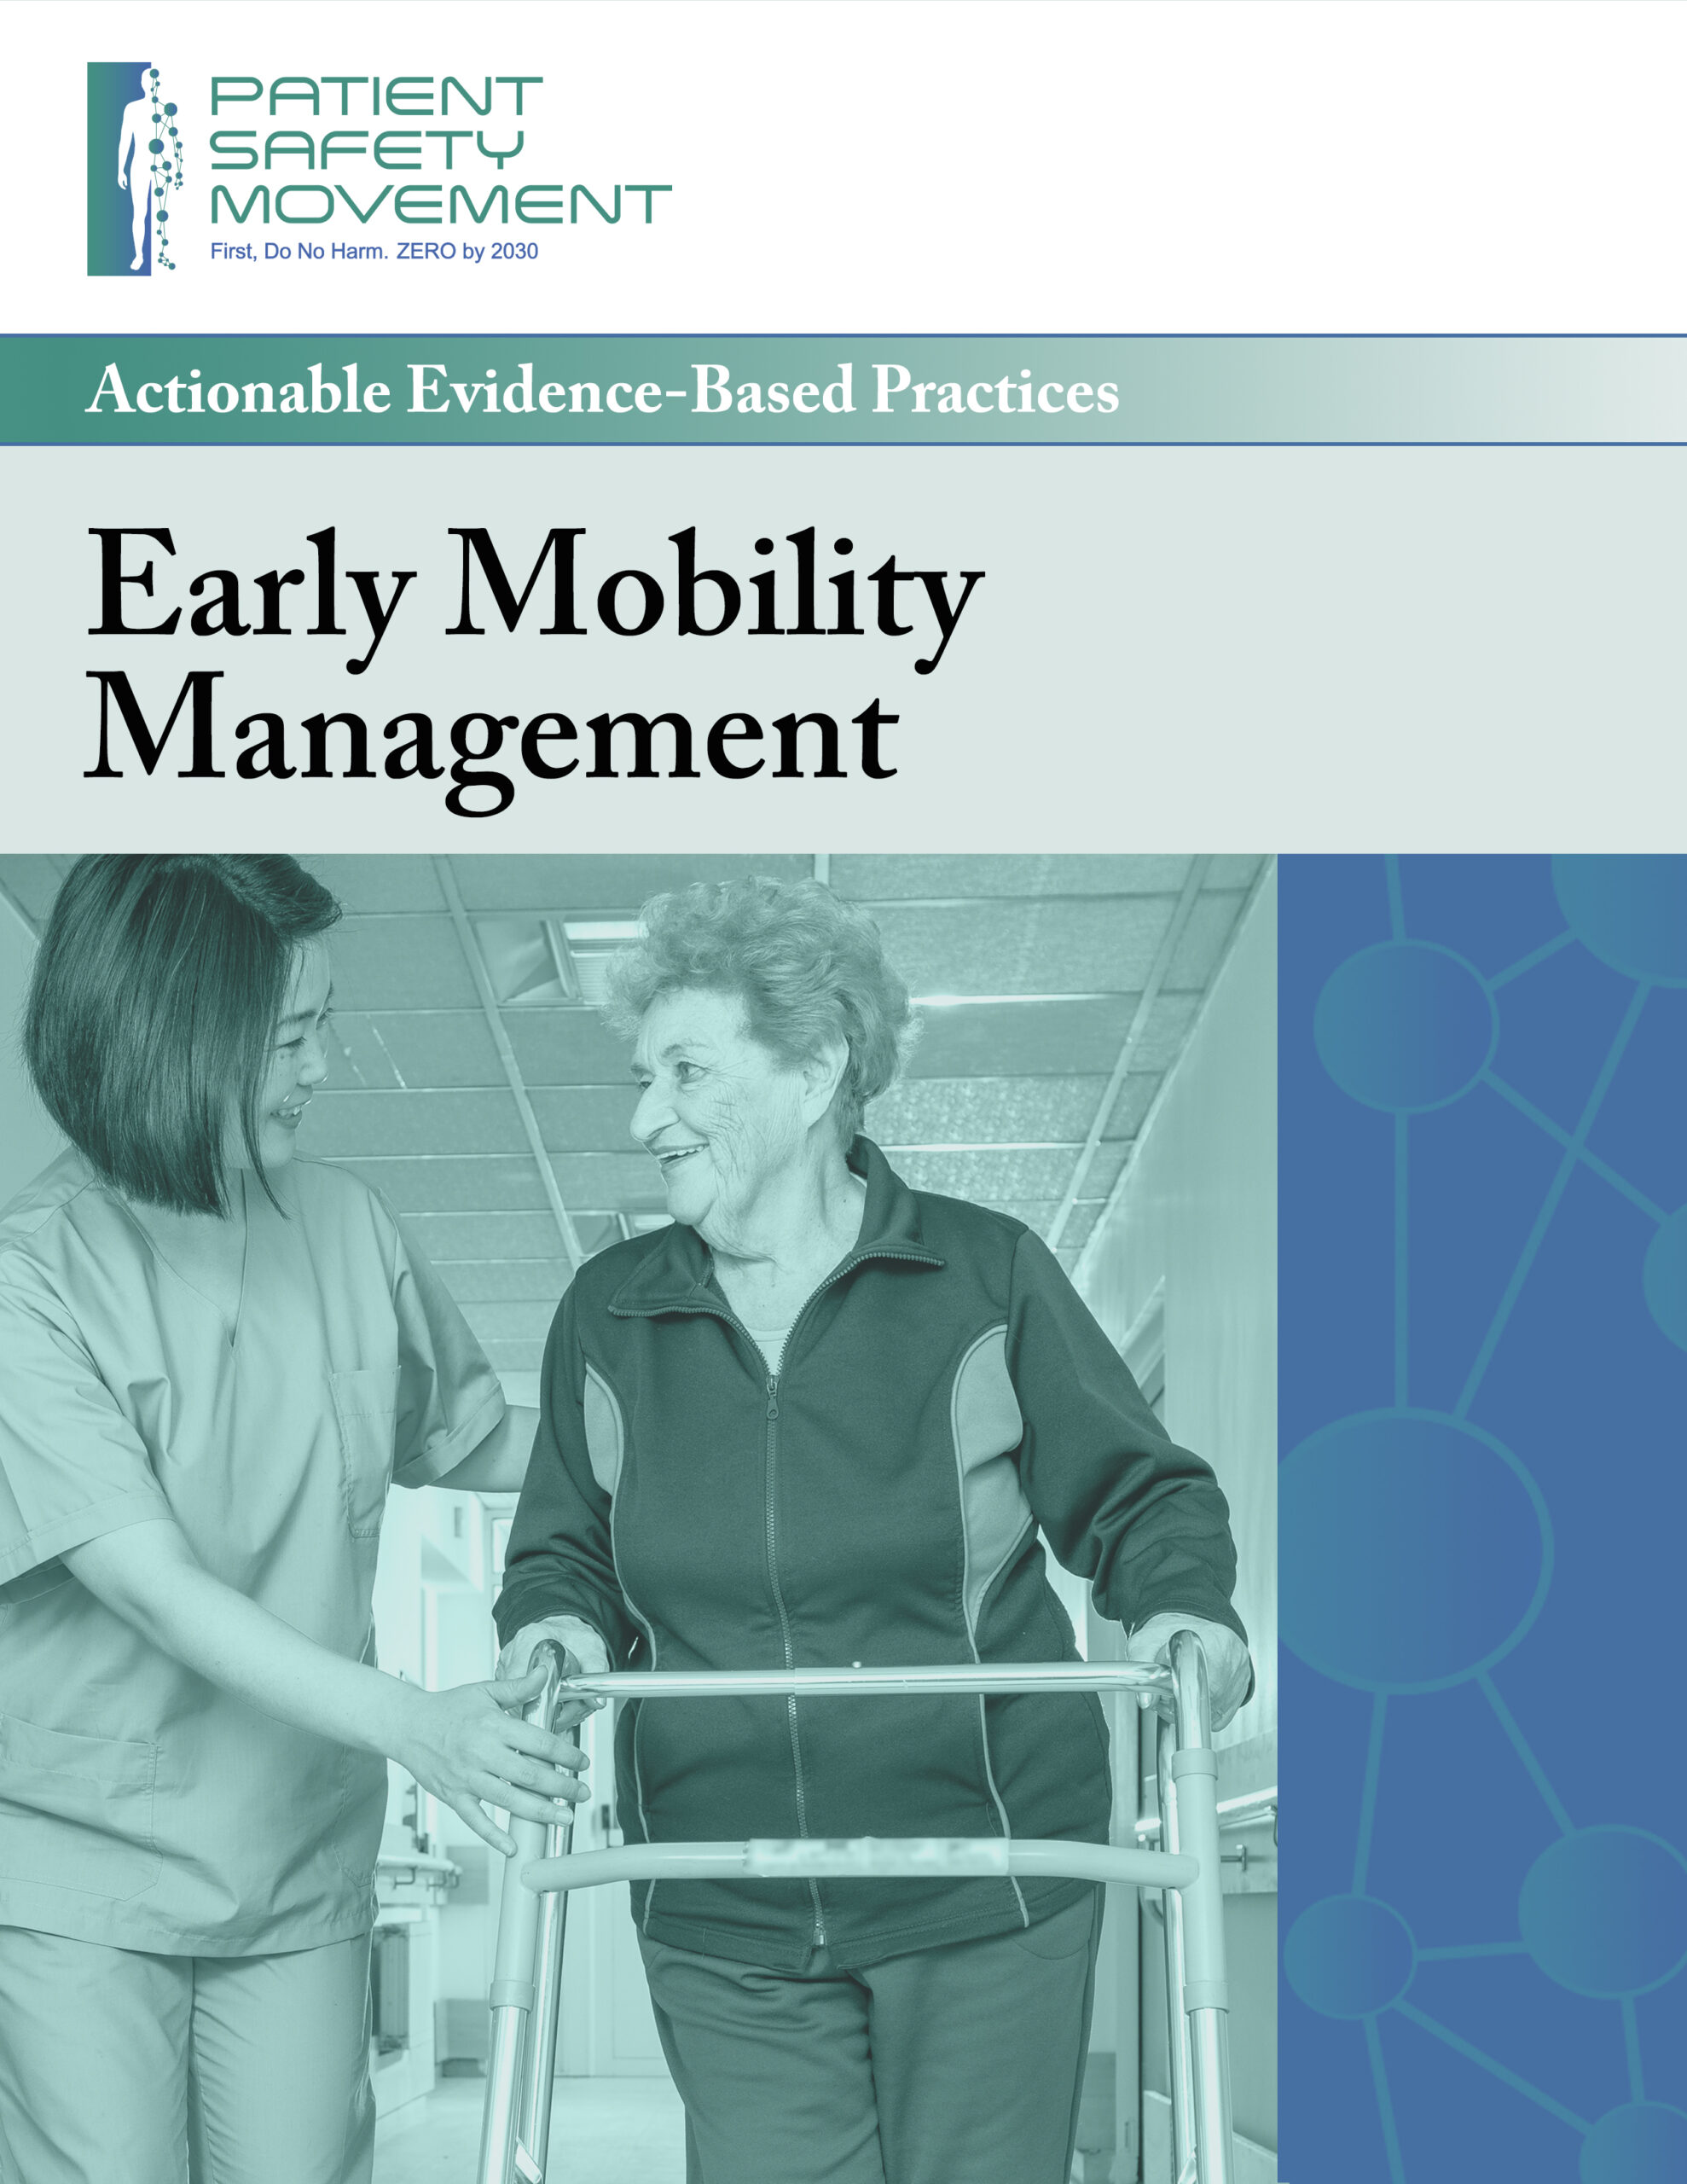 Early Mobility Management